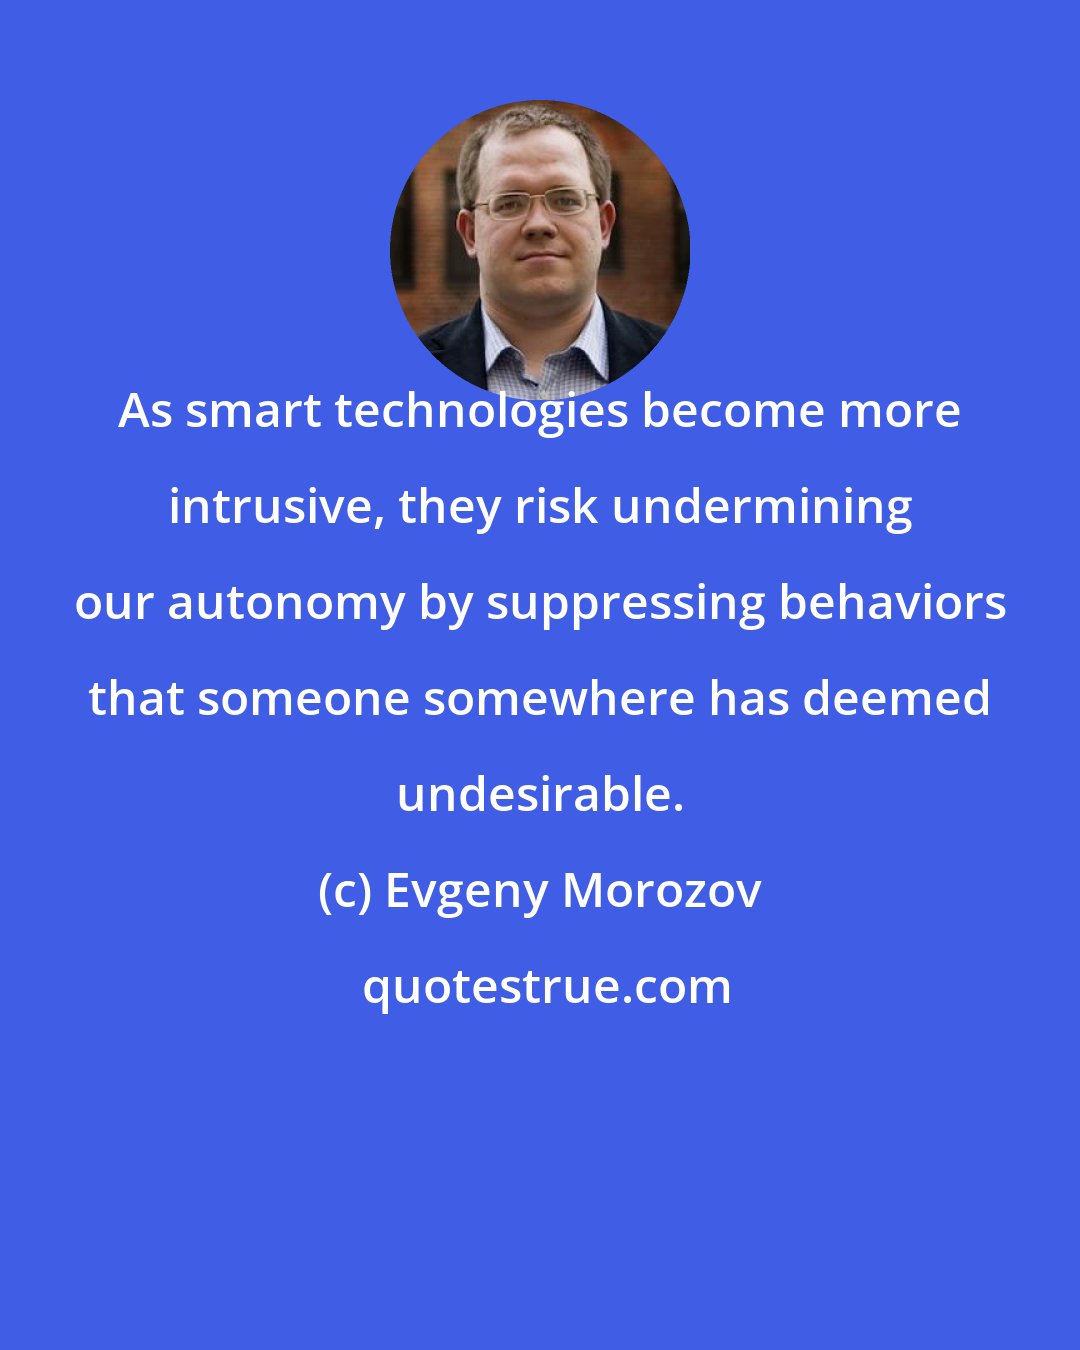 Evgeny Morozov: As smart technologies become more intrusive, they risk undermining our autonomy by suppressing behaviors that someone somewhere has deemed undesirable.